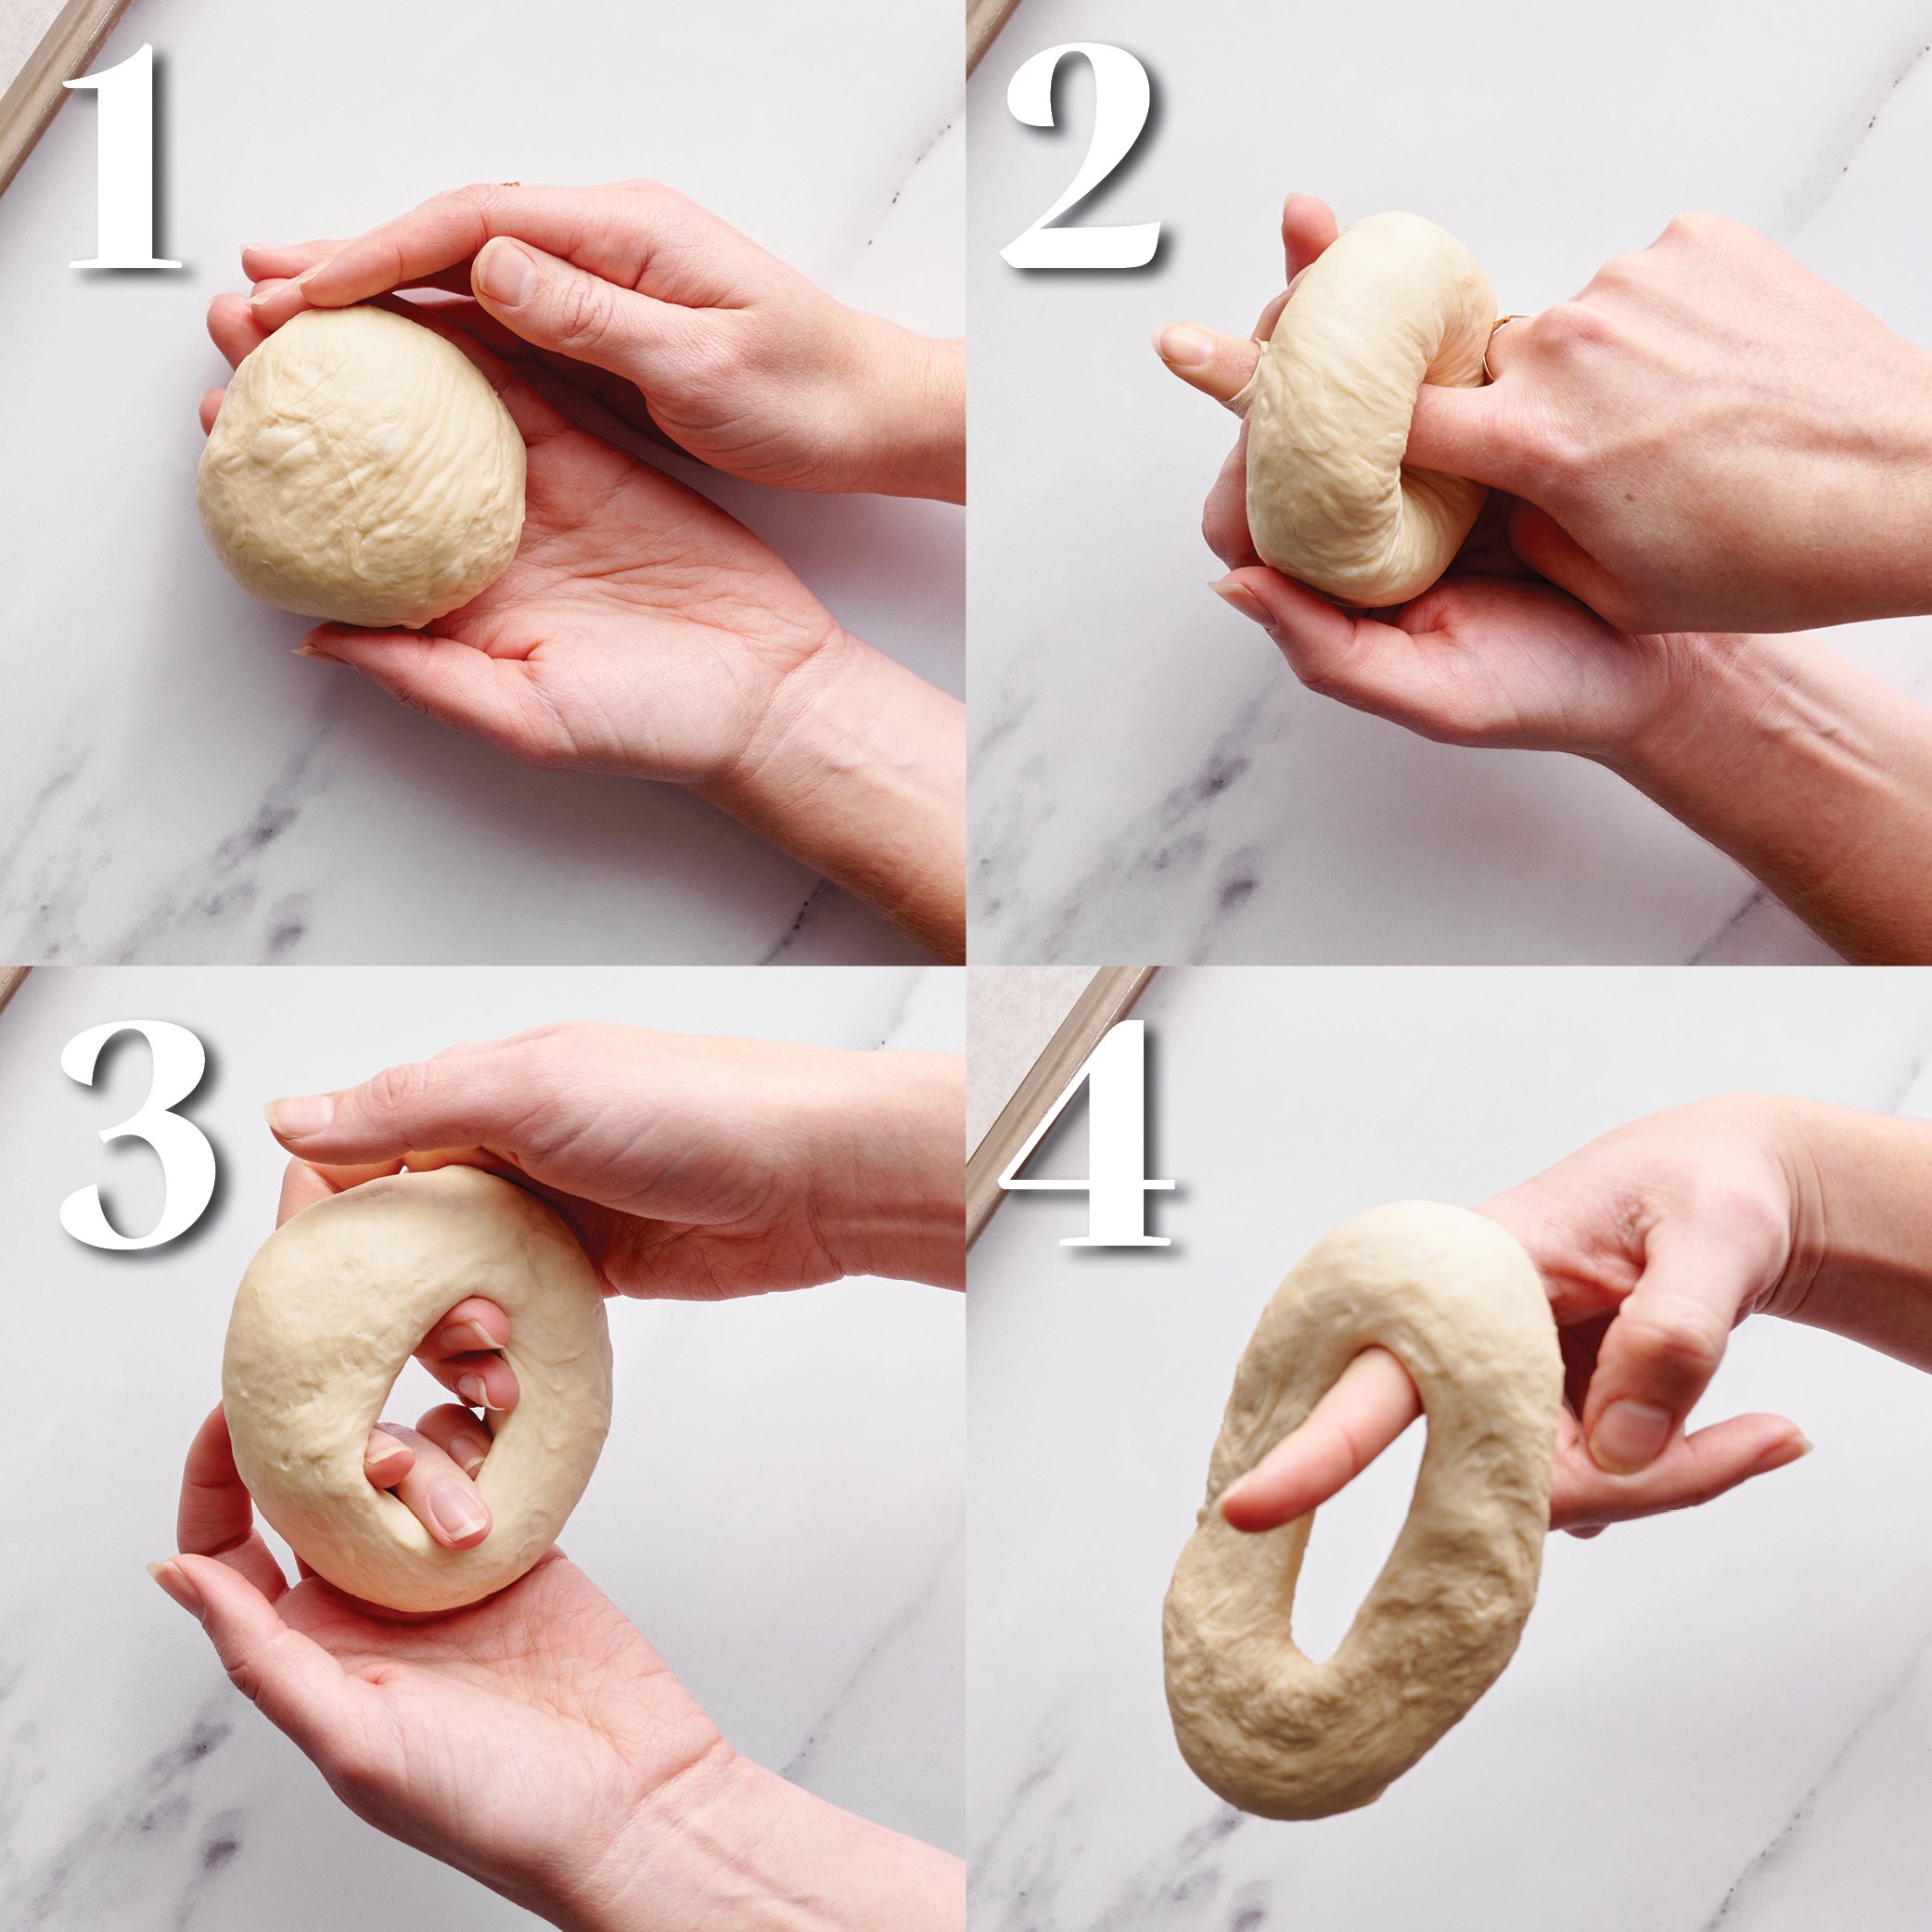 step by step guide showing how to shape bagels